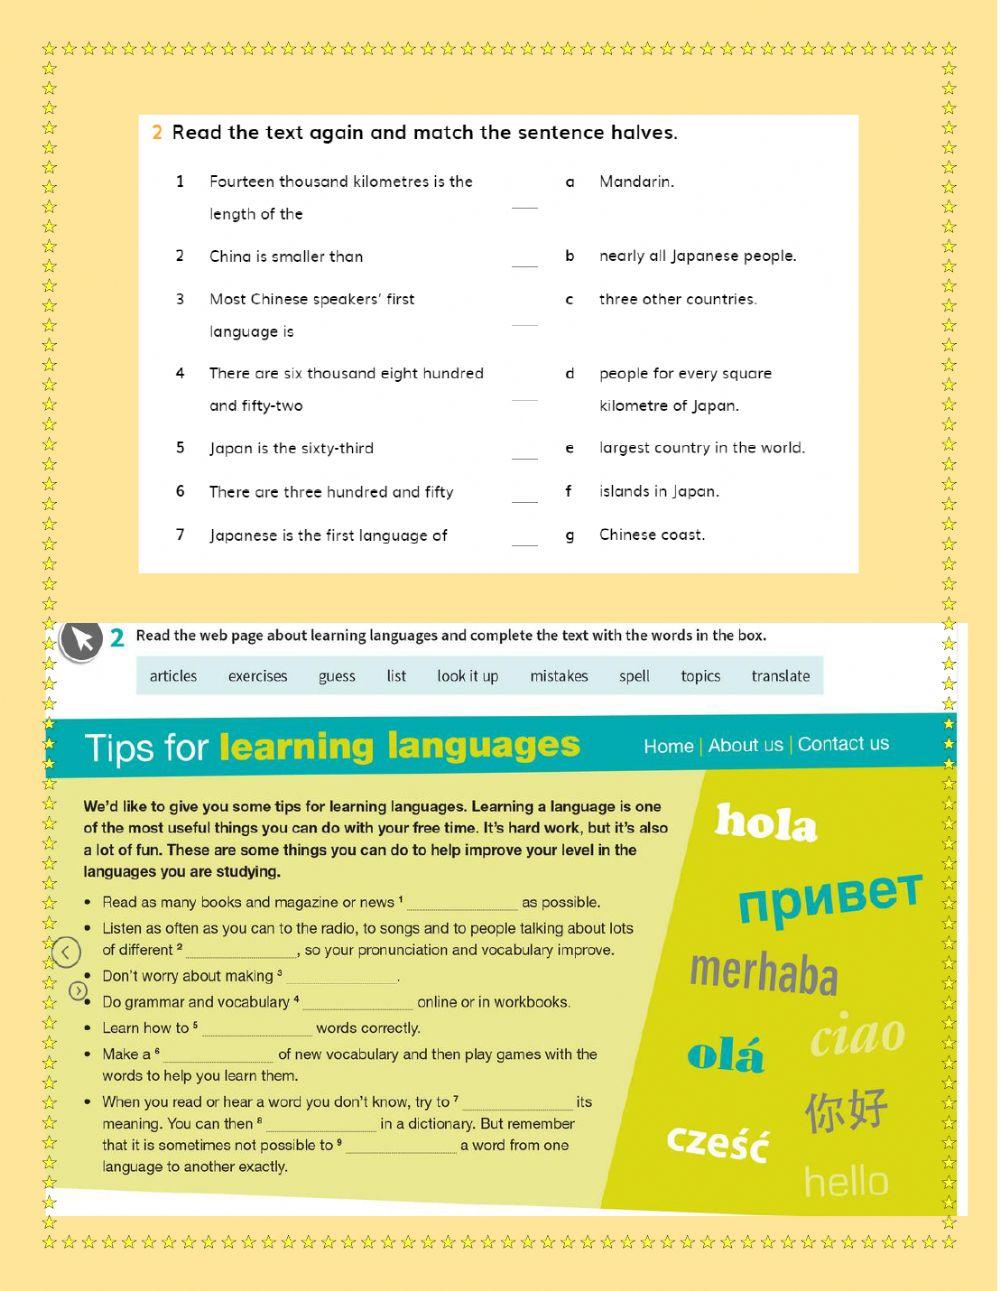 Reading about learning languages